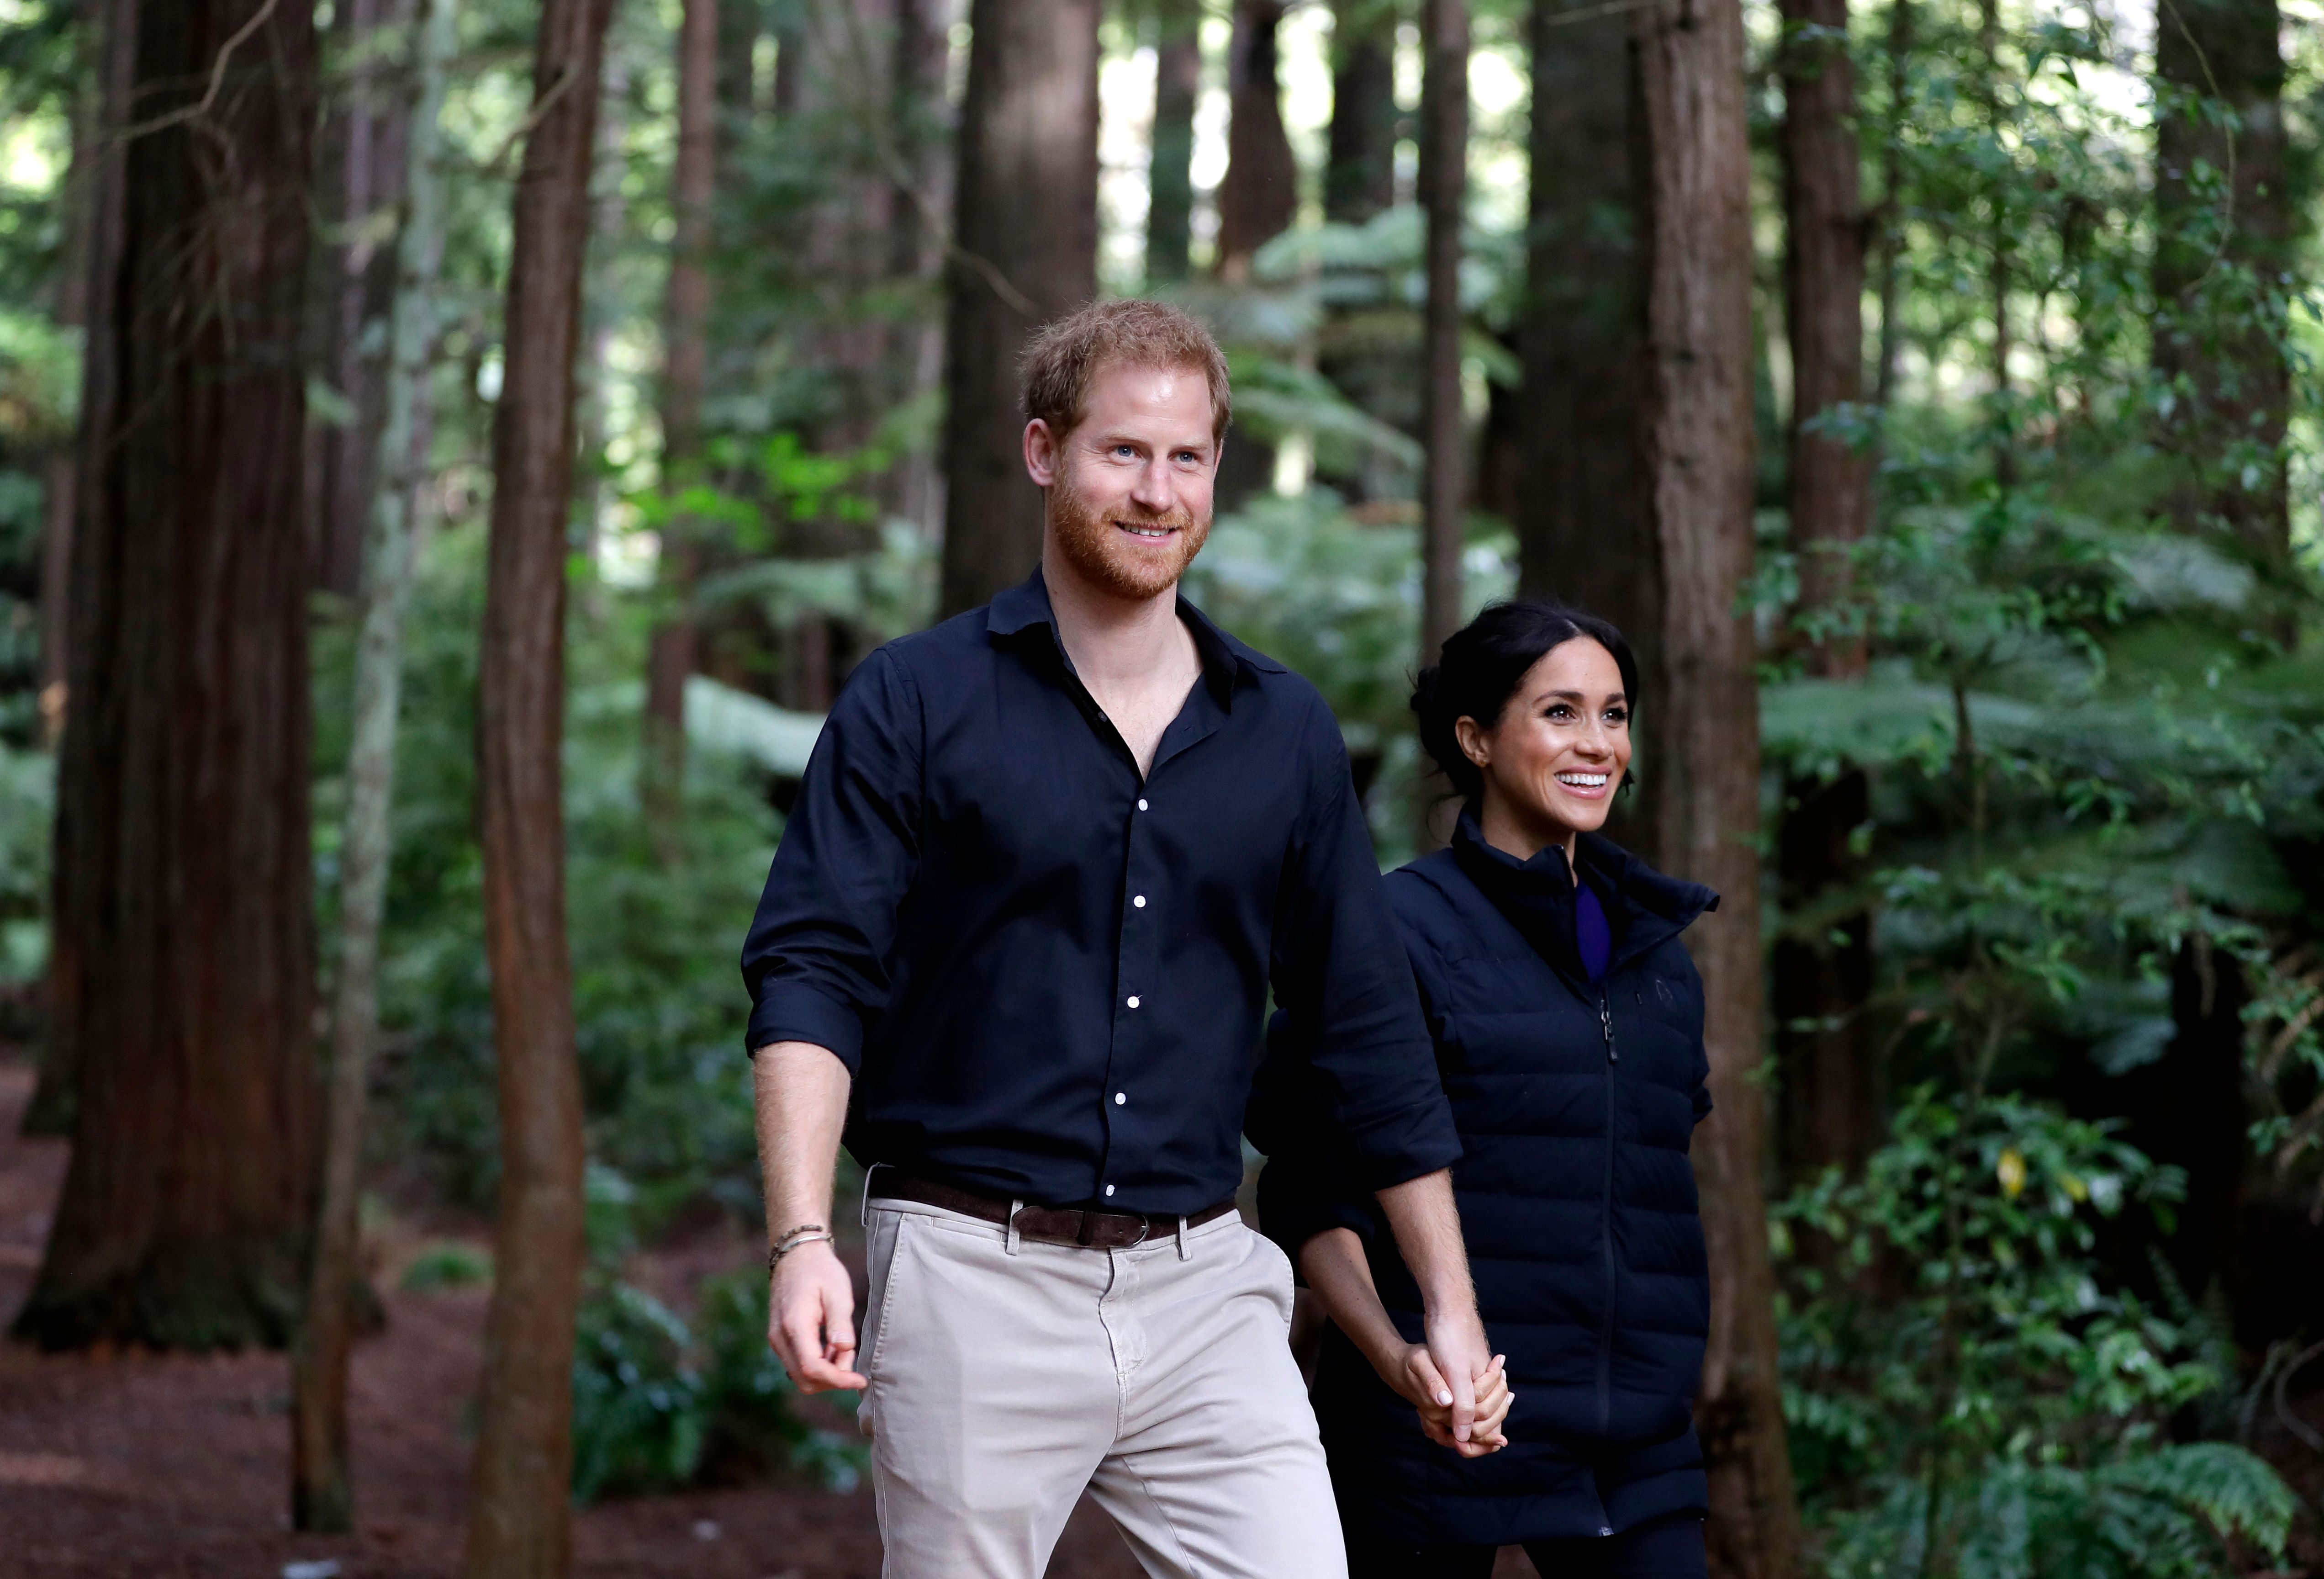 The Duke oand Duchess of Sussex at the Redwoods Tree Walk in October 31, 2018 in Rotorua, New Zealand | Source: Getty Images